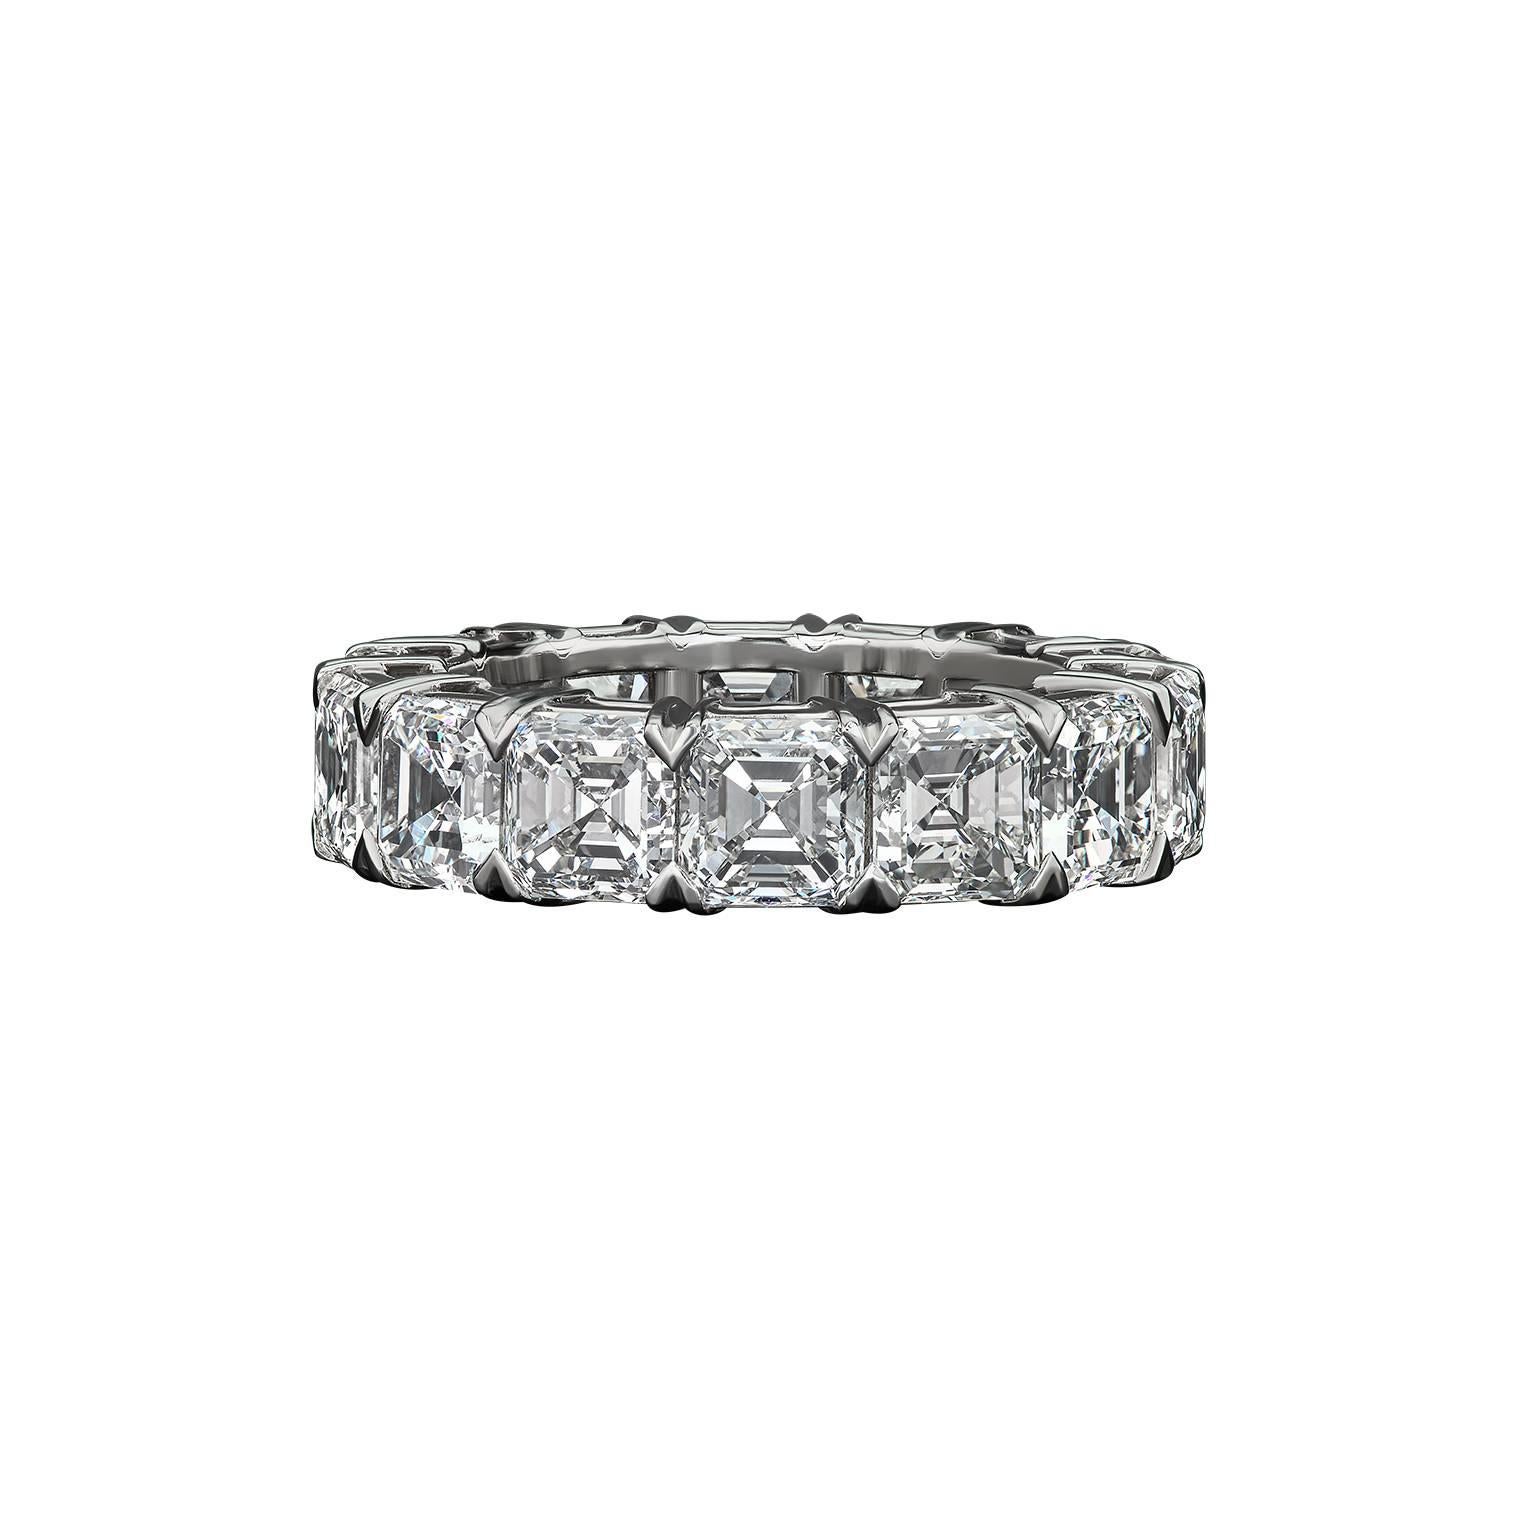 Asscher Cut Diamond Stunner. This beautiful Ring is handmade in Platinum. It boasts 11.58ct tw of spectacular Asscher Cut Diamonds.

Fits finger size 6

David Rosenberg is President of the Diamond Bourse of the Southeastern United States and is